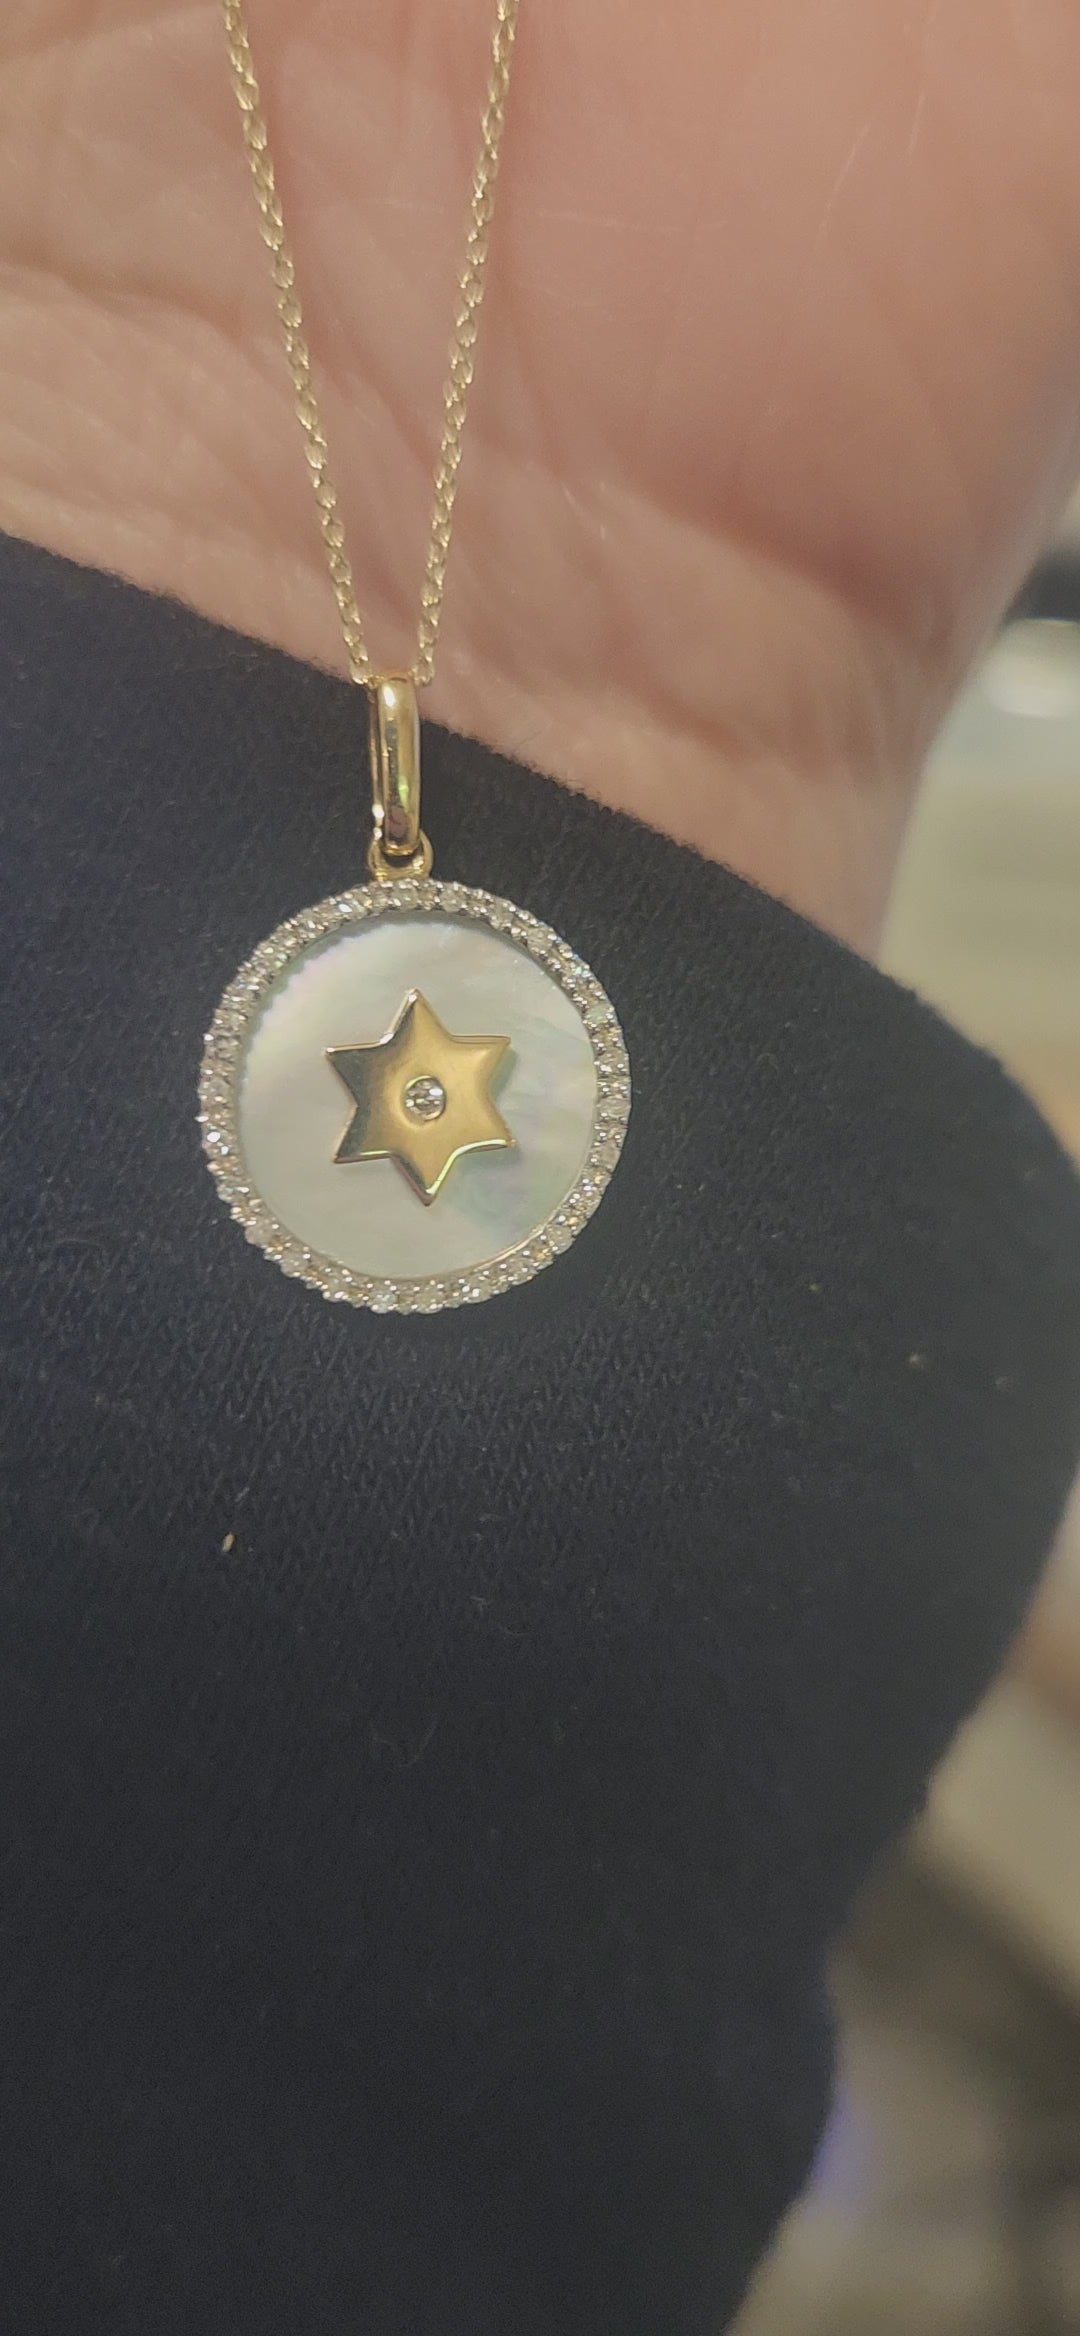 Diamond and Mother of Pearl Star of David Necklace